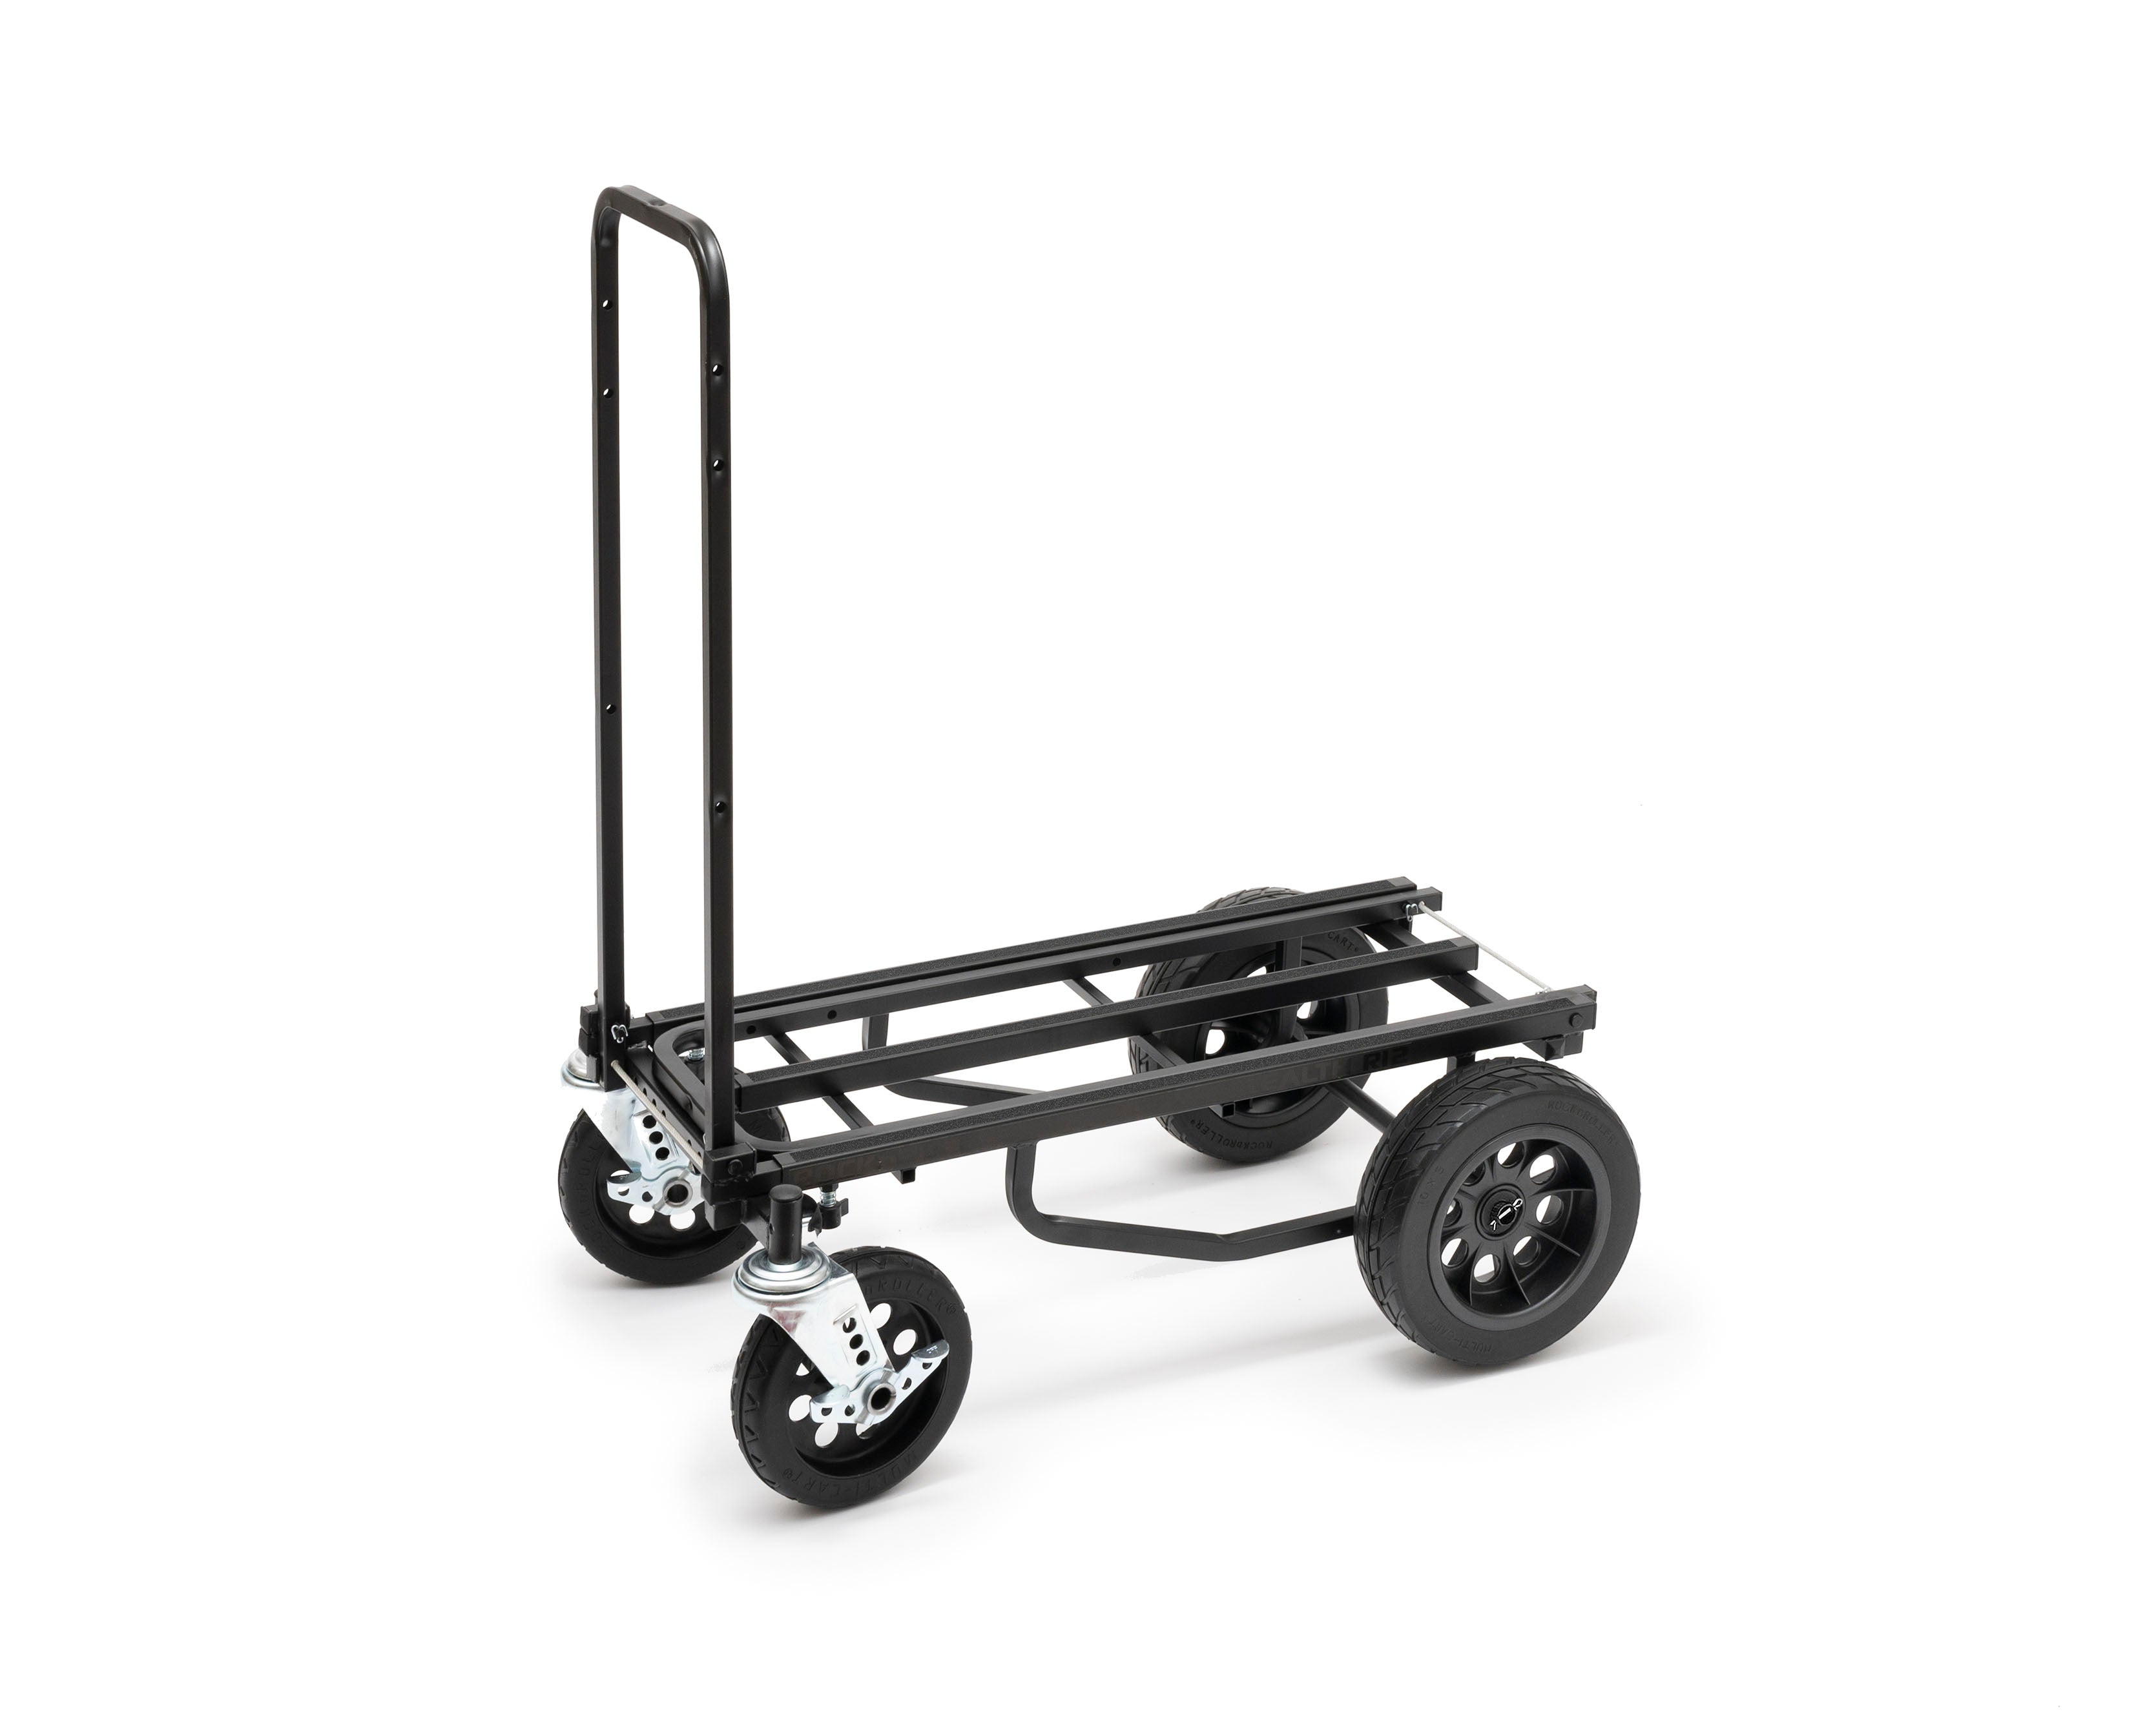 Rock-N-Roller Multi-Cart - Move ALL Your Gear In One Trip!